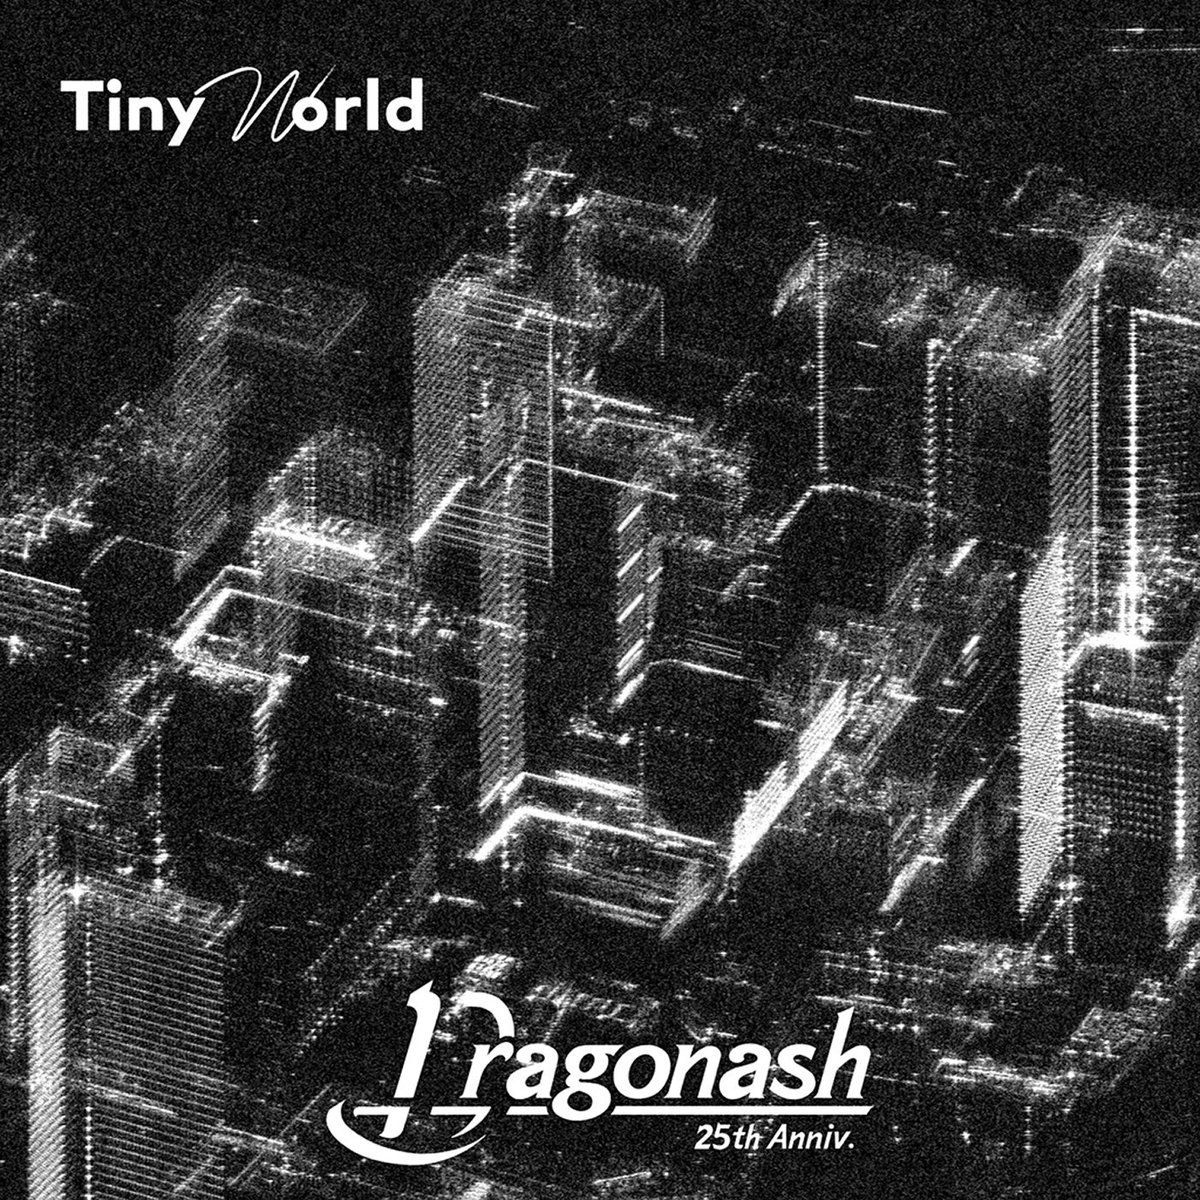 Cover art for『Dragon Ash - Tiny World』from the release『Tiny World